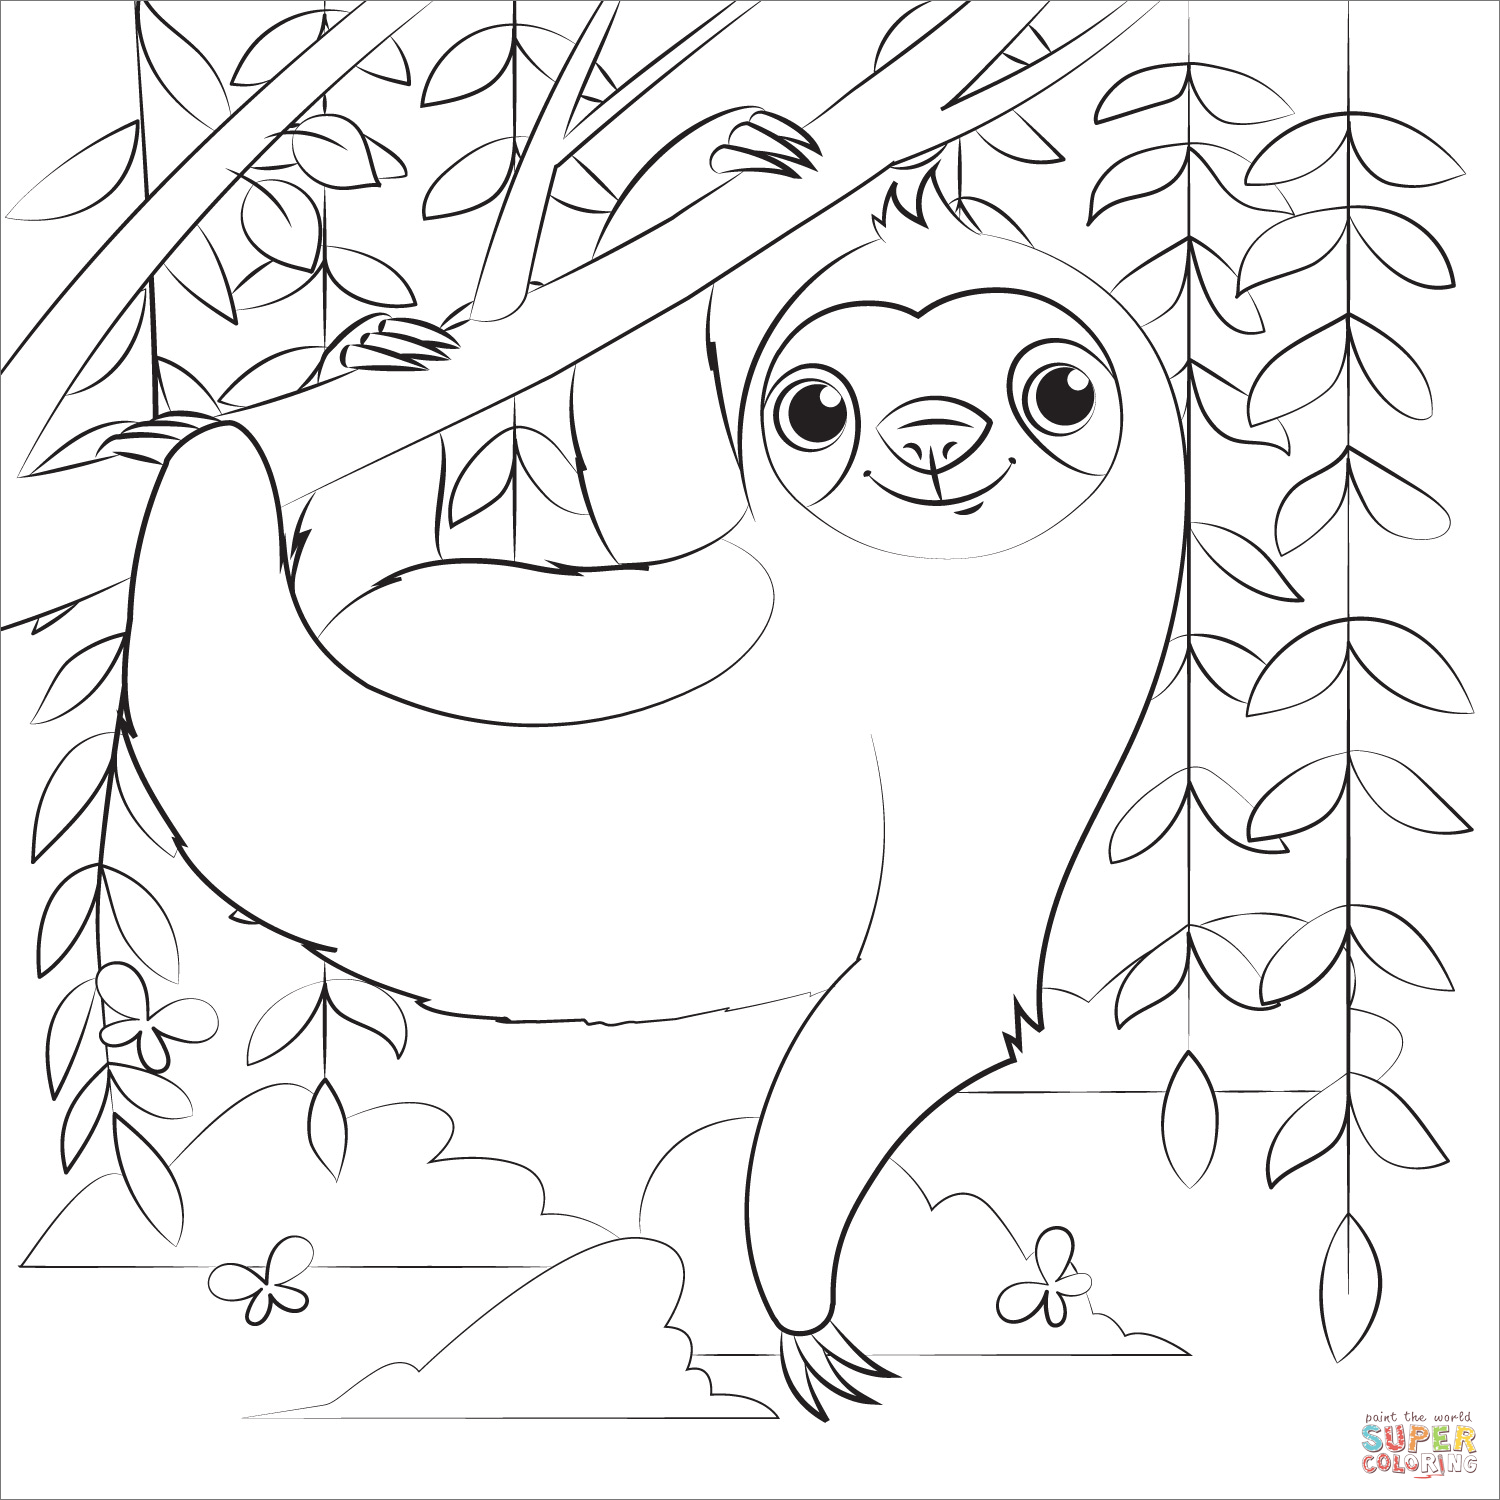 Sloth coloring page | Free Printable Coloring Pages